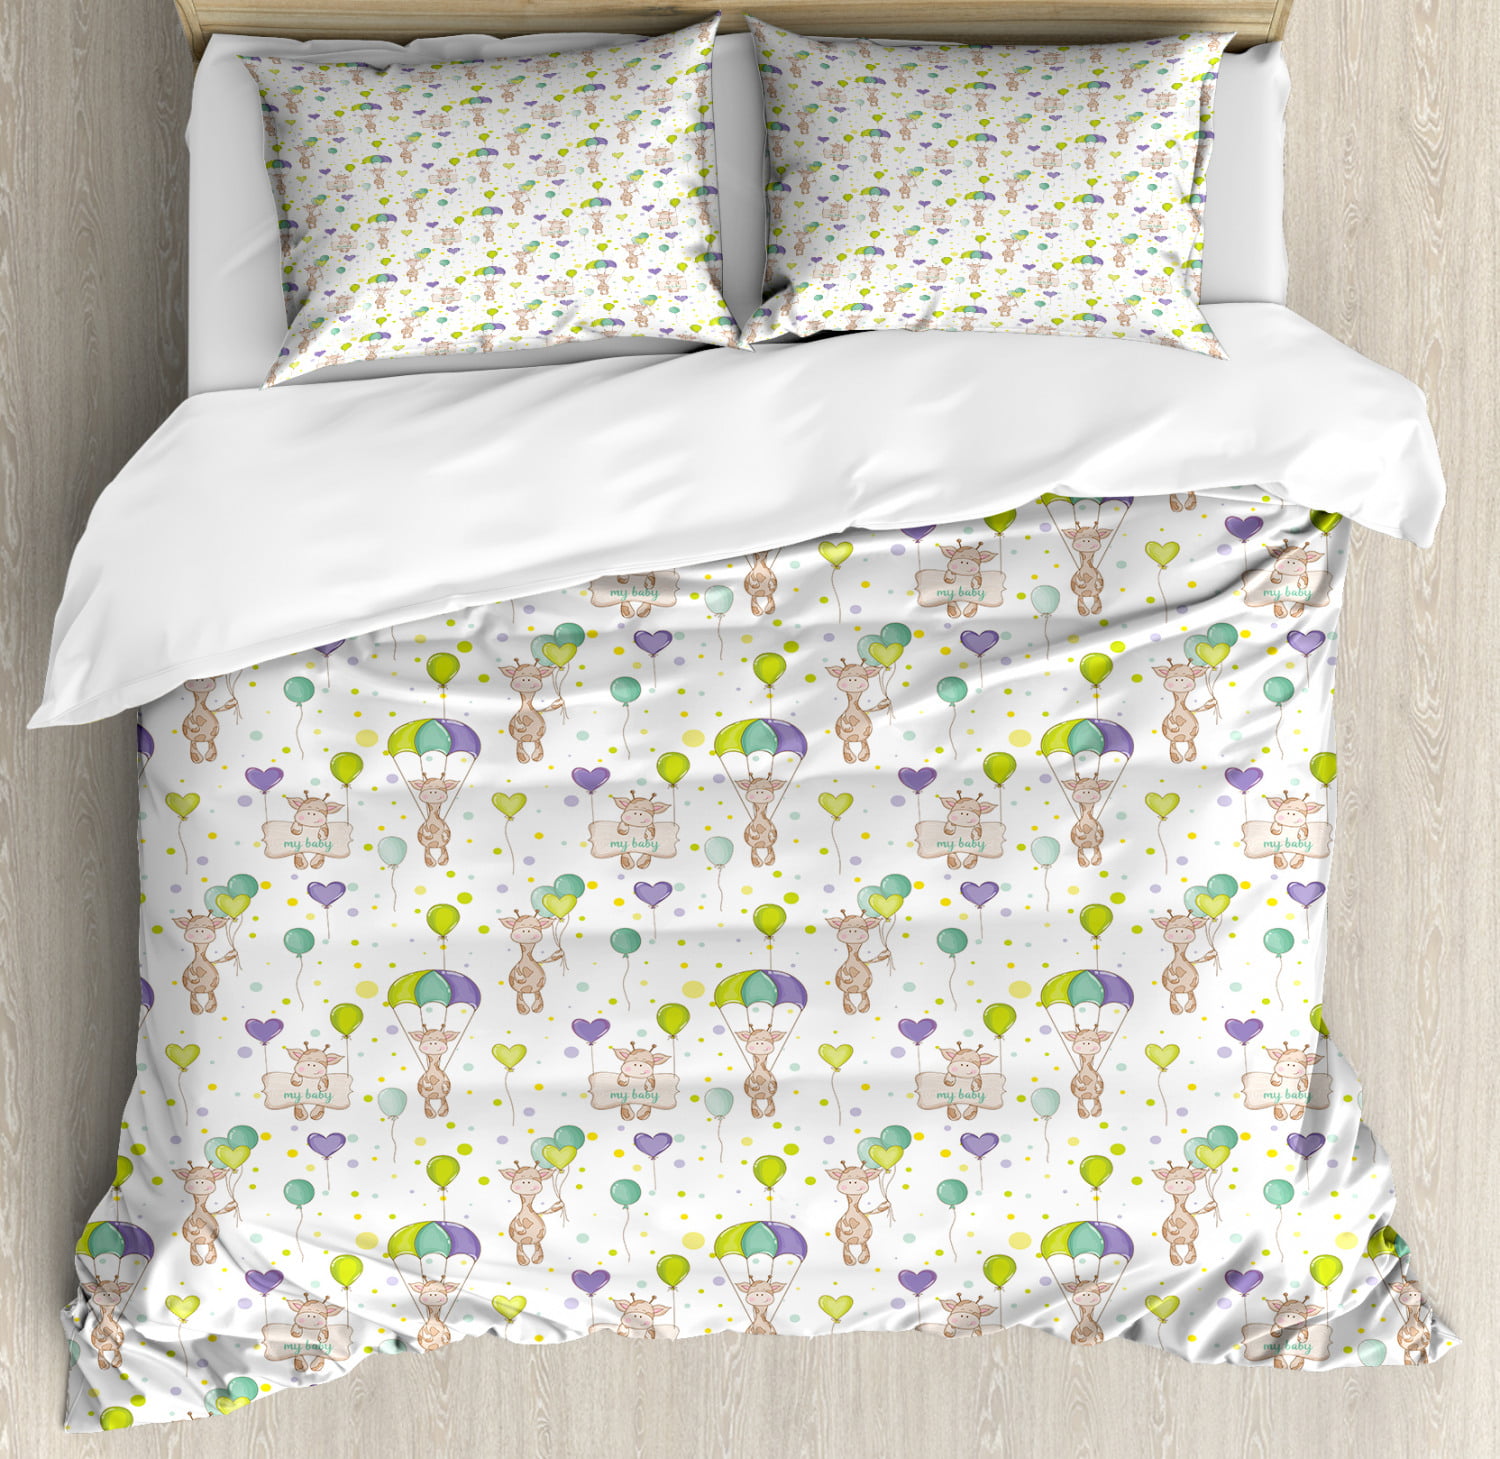 Baby Duvet Cover Set Infant Giraffes Flying With Balloons With